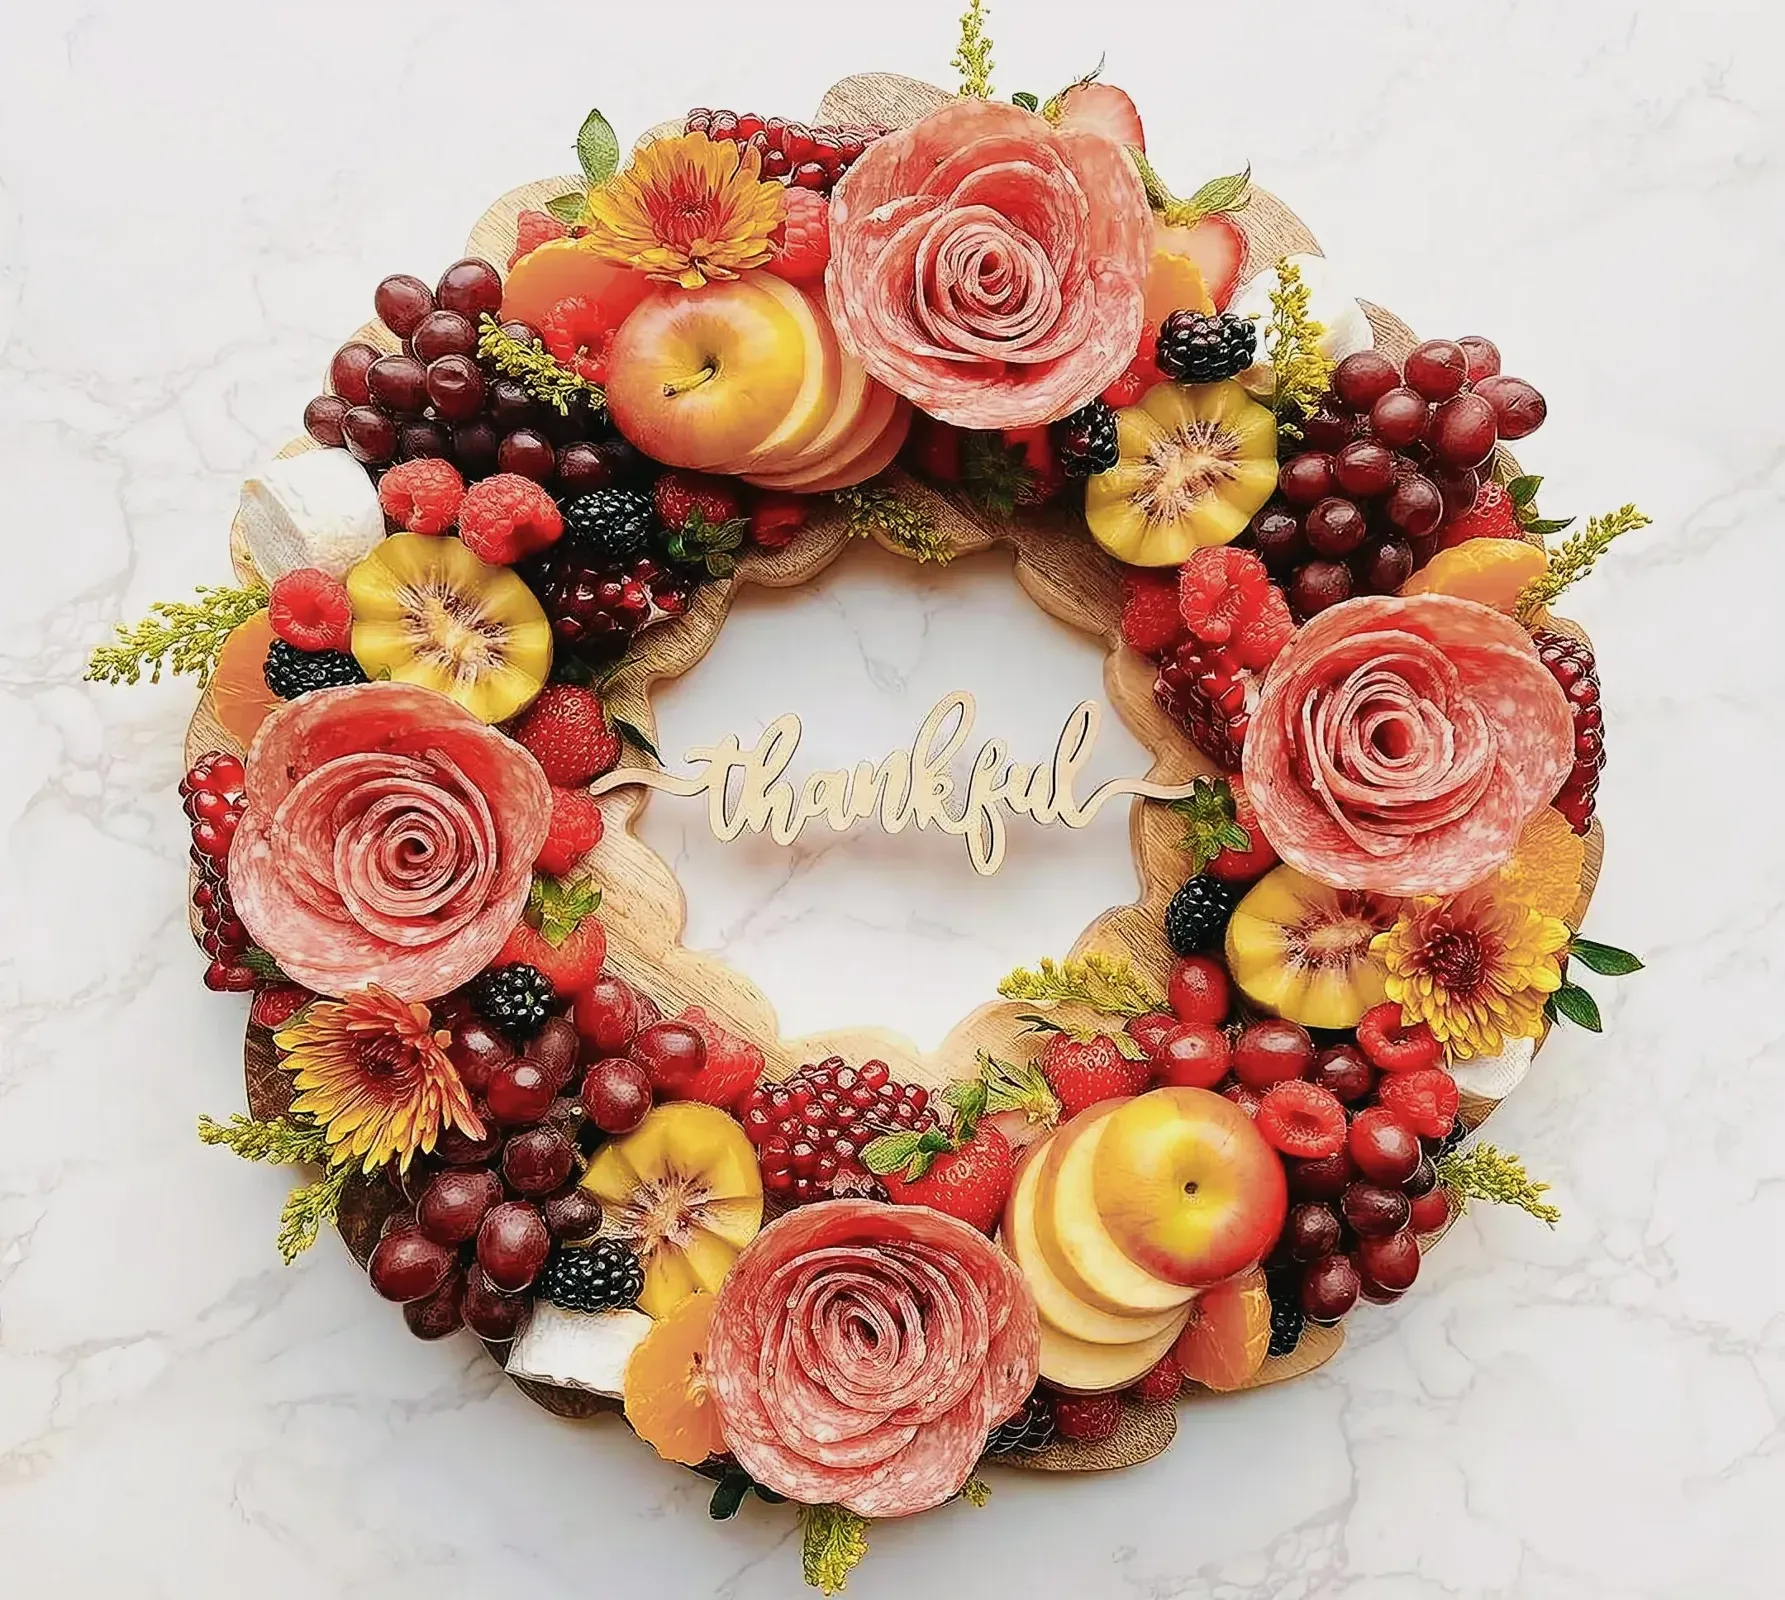 A beautifully crafted wreath with fruits and flowers